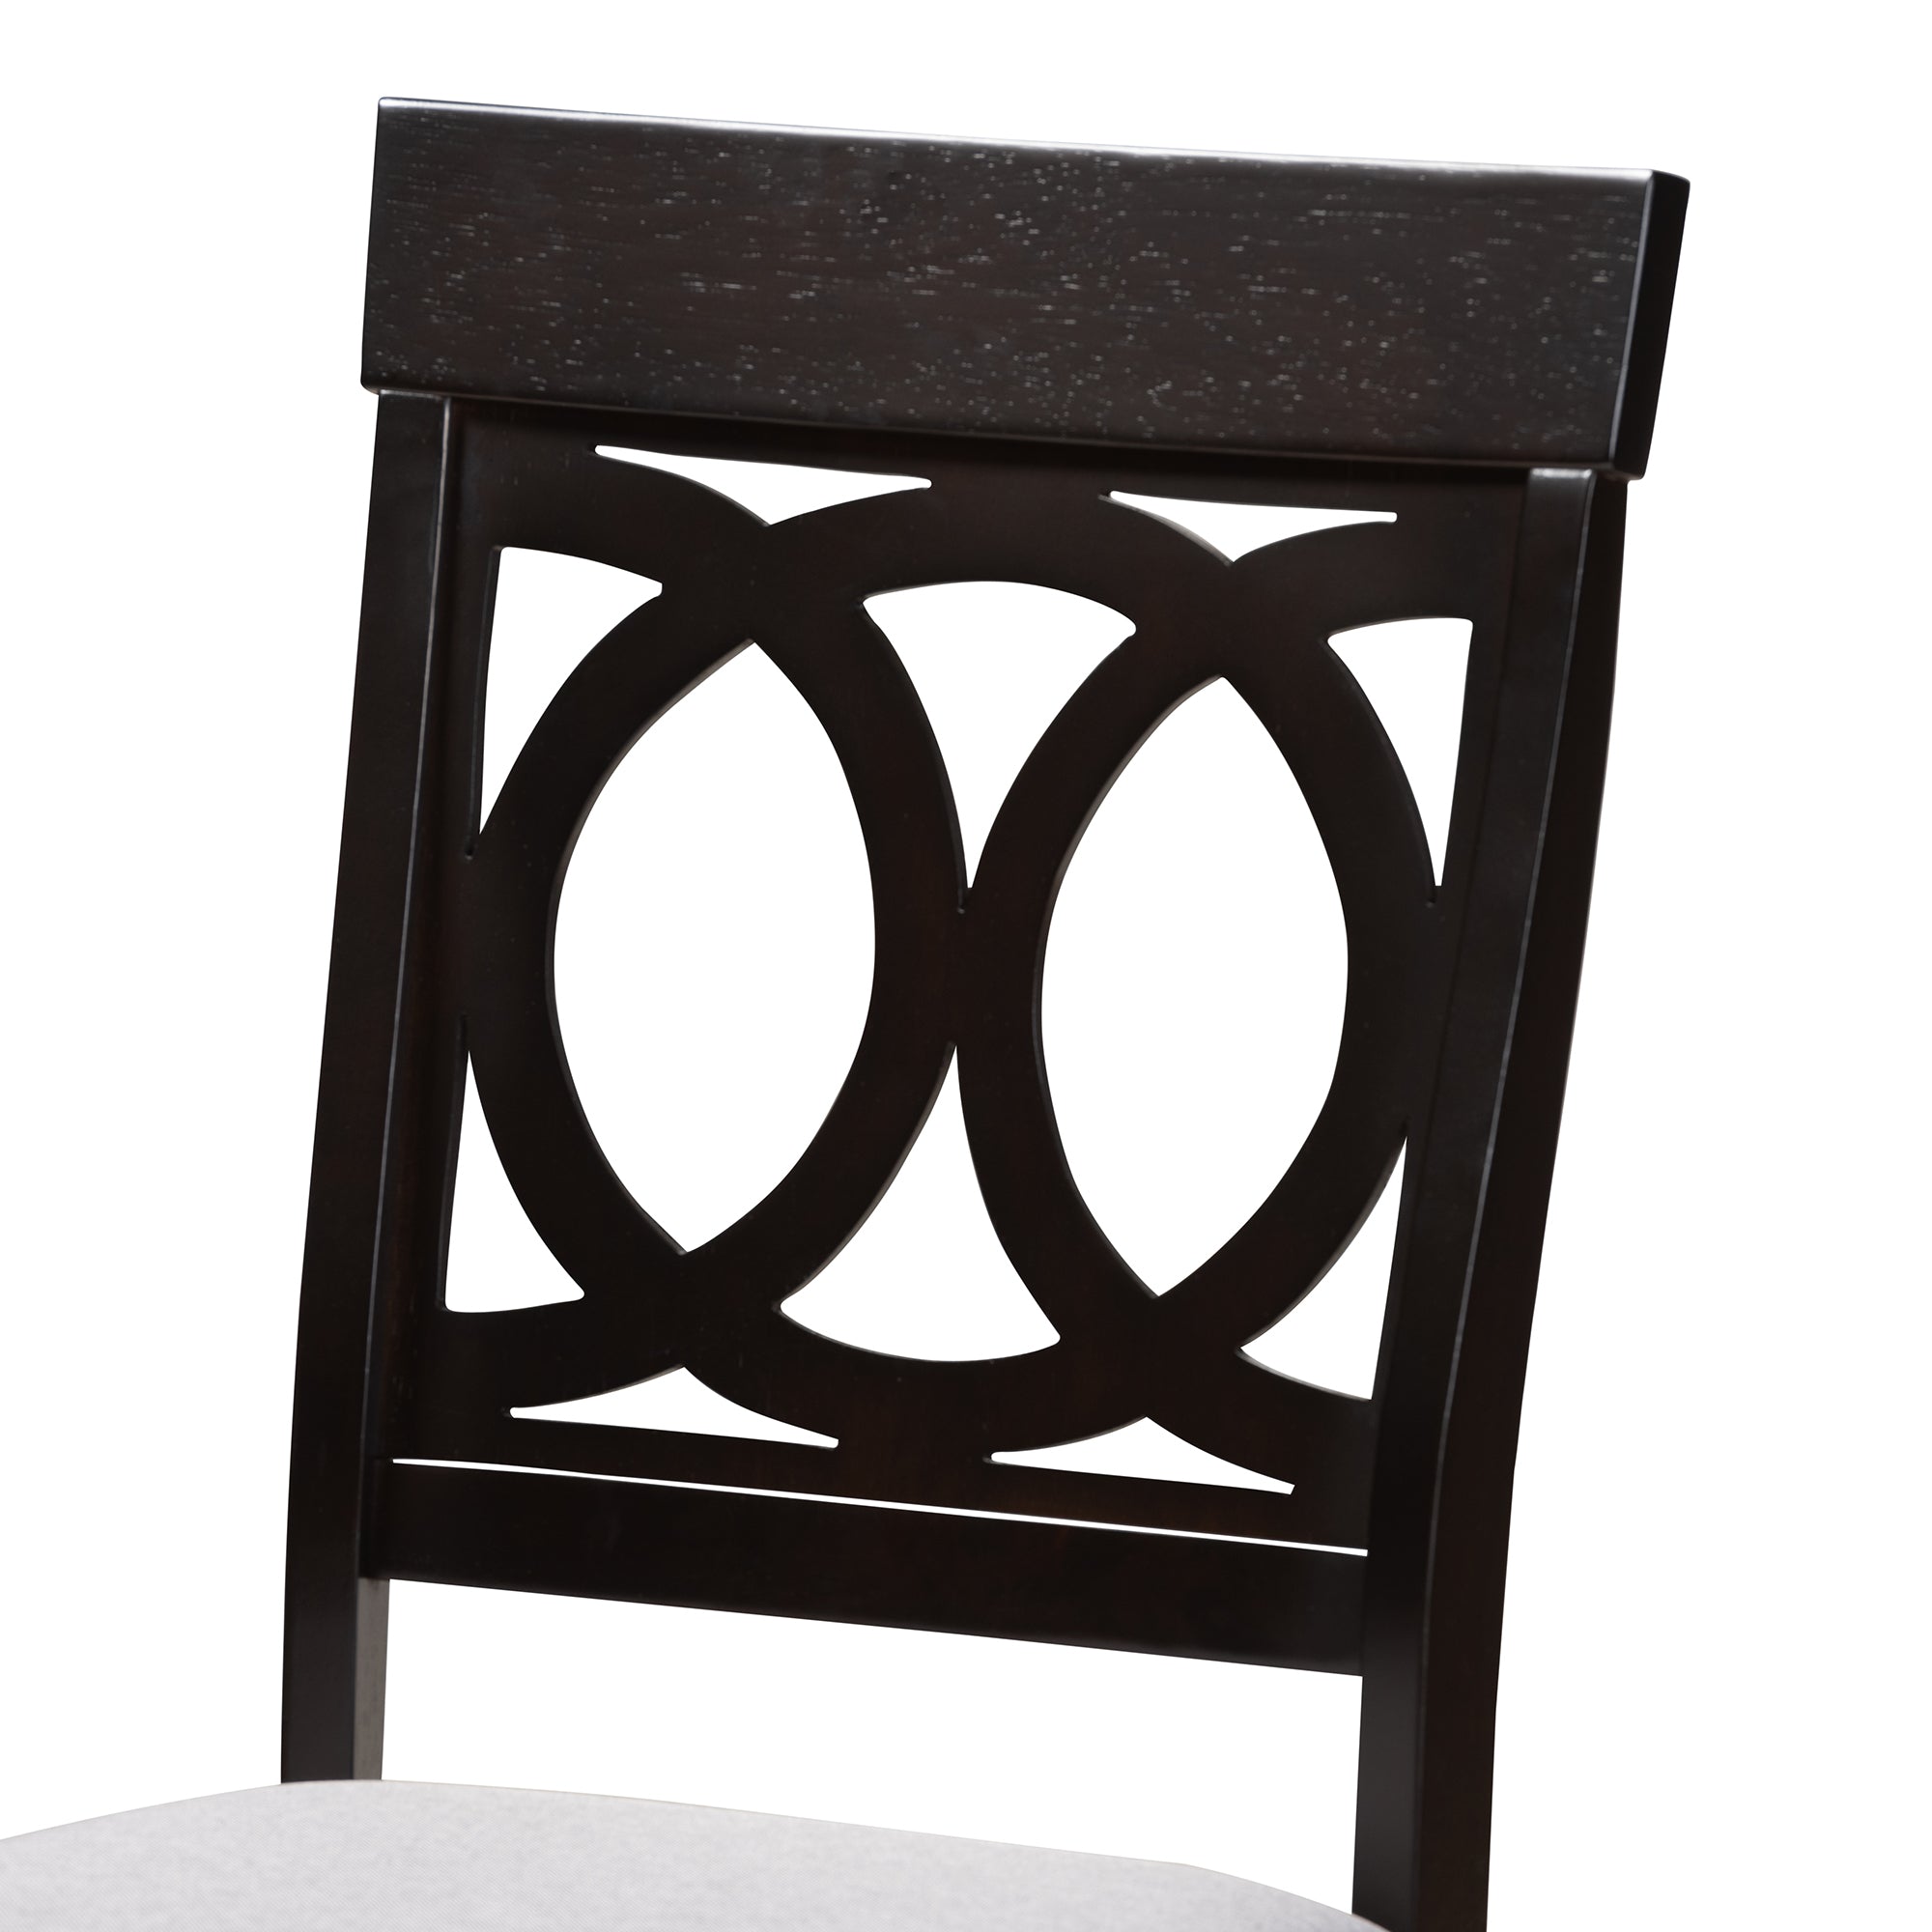 Lucie Contemporary Dining Table & Dining Chairs 5-Piece-Dining Set-Baxton Studio - WI-Wall2Wall Furnishings